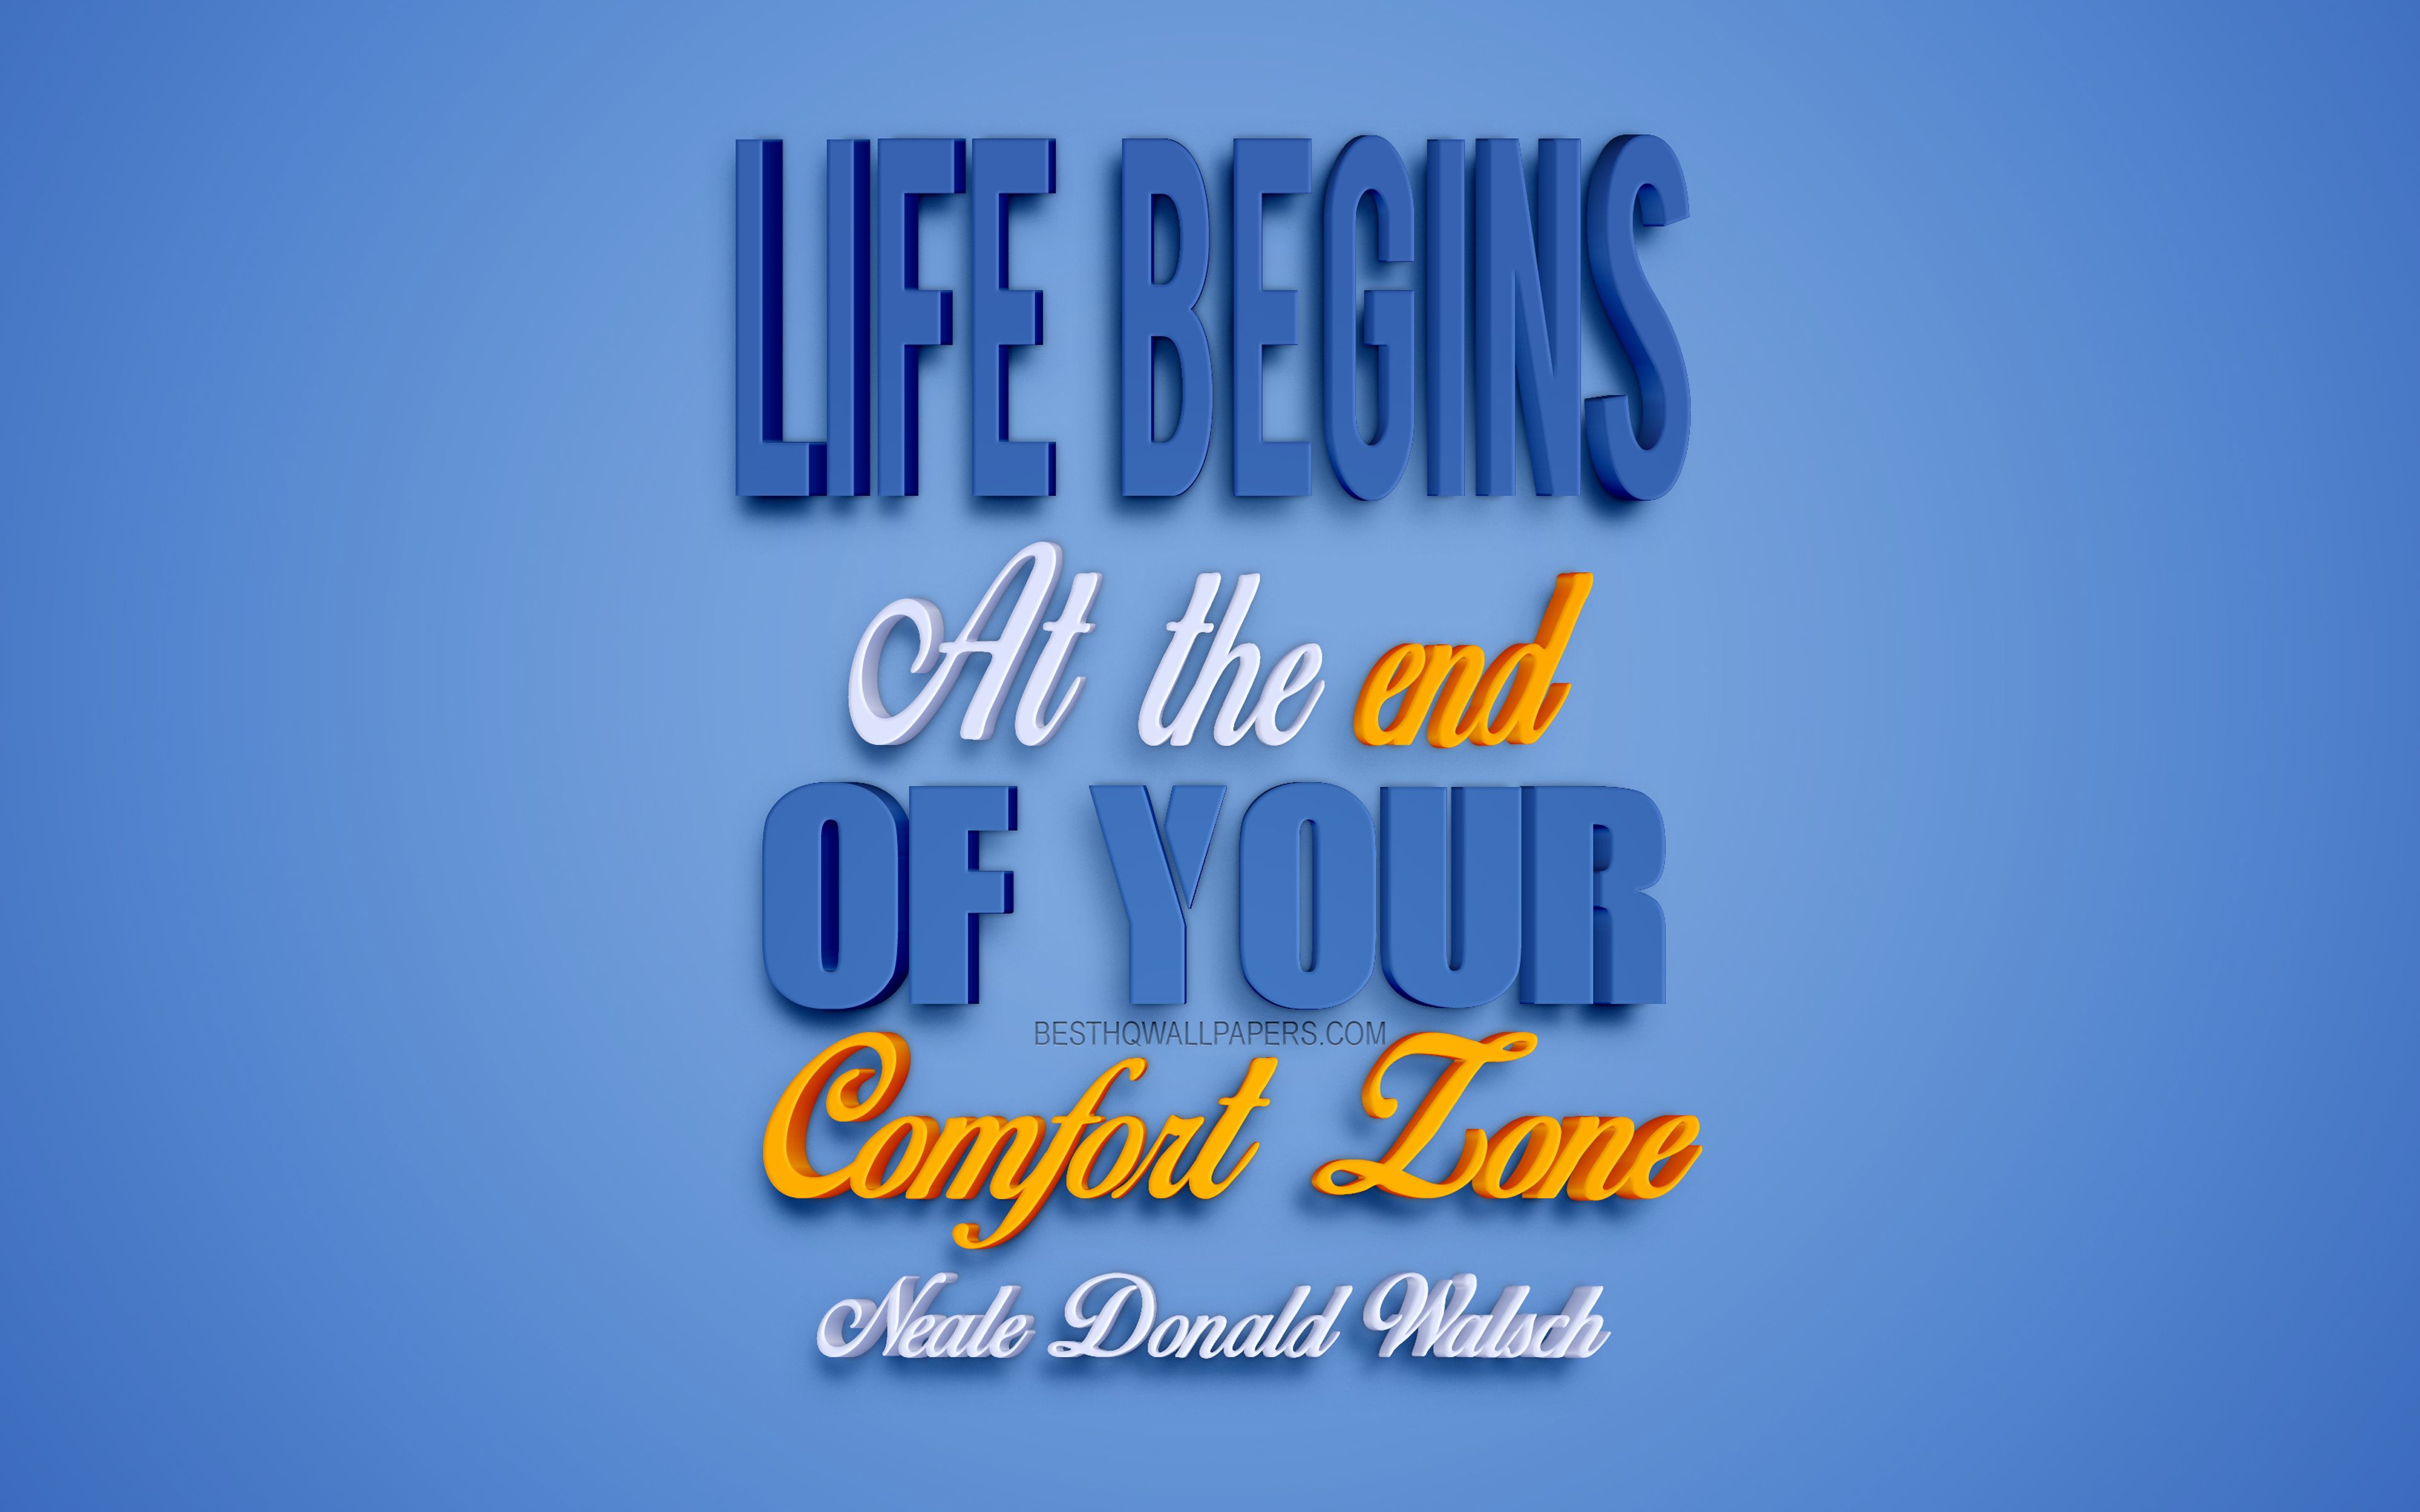 Download wallpaper Life begins at the end of your comfort zone, Neale Donald Walsch quotes, popular quotes, blue 3D art, quotes about life, motivation, inspiration for desktop with resolution 3840x2400. High Quality